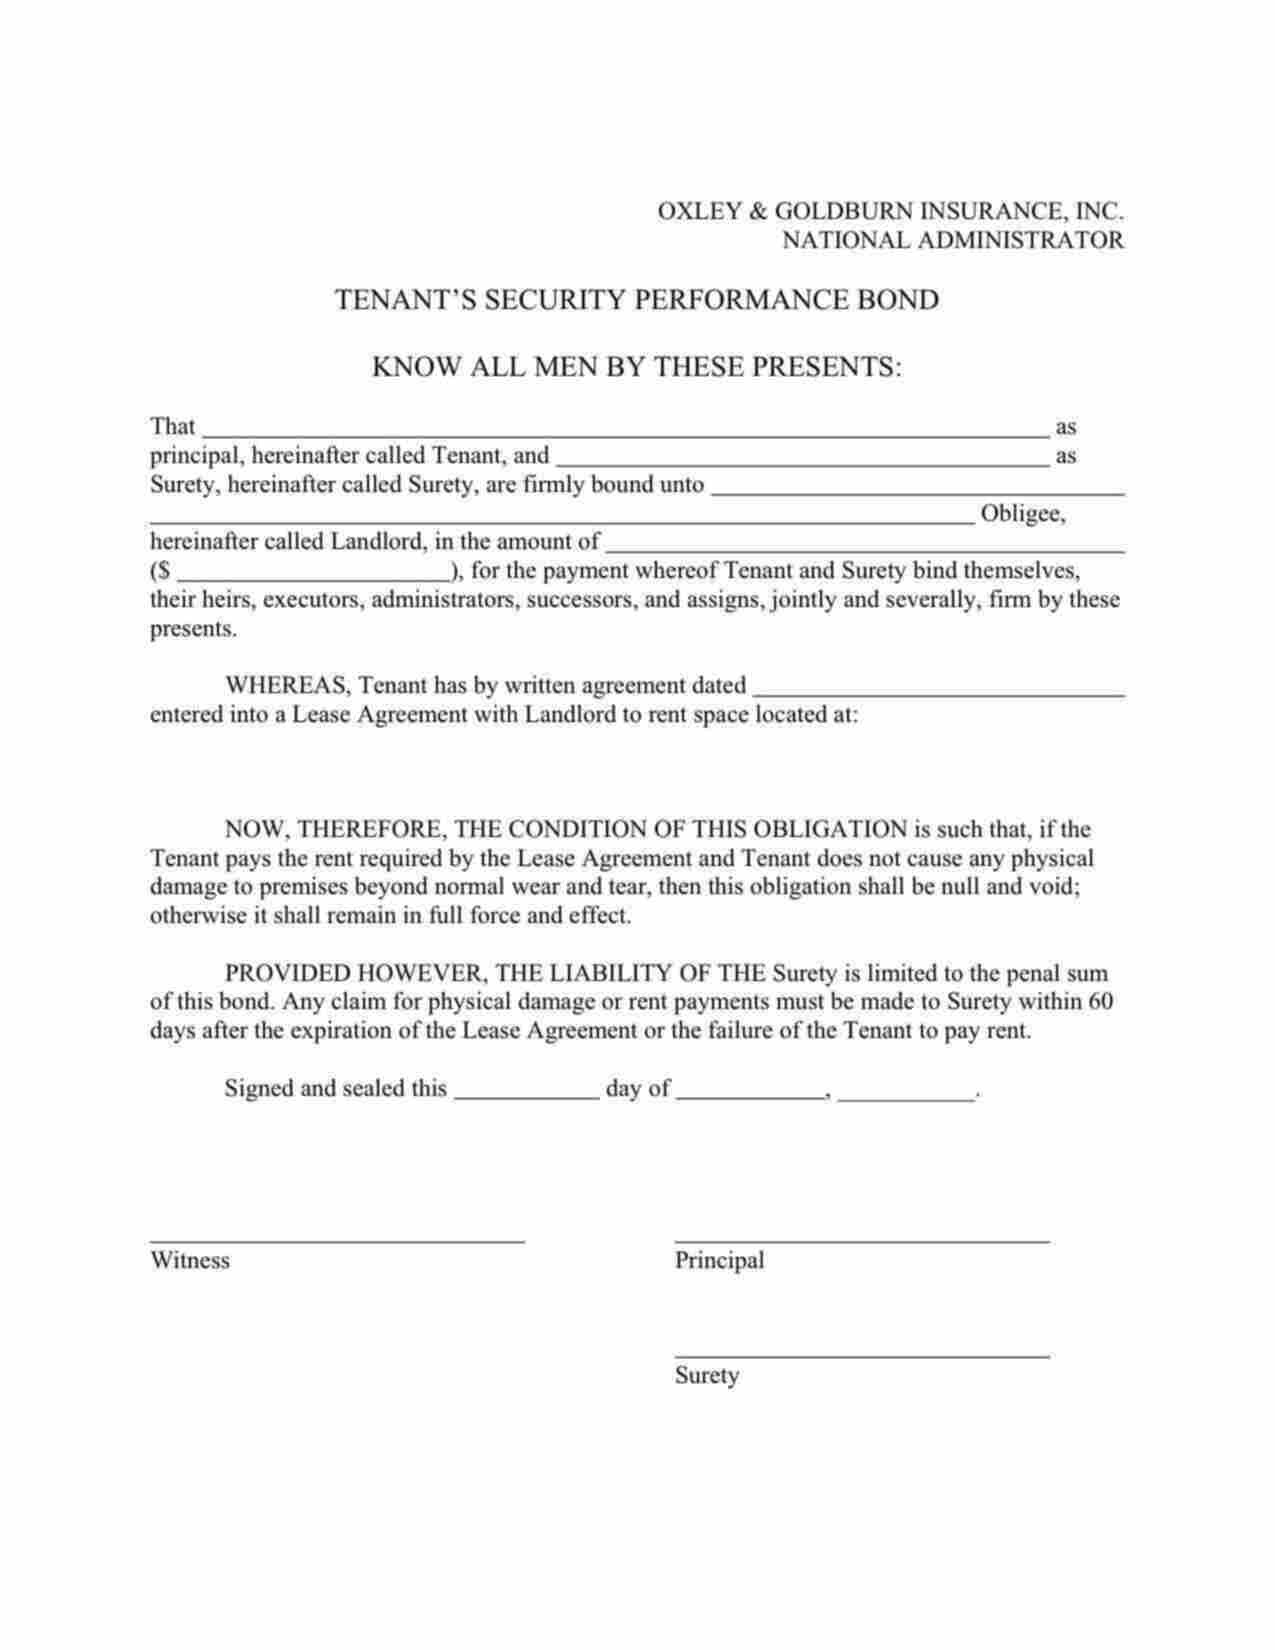 Federal Tenant's Security Performance Bond Form